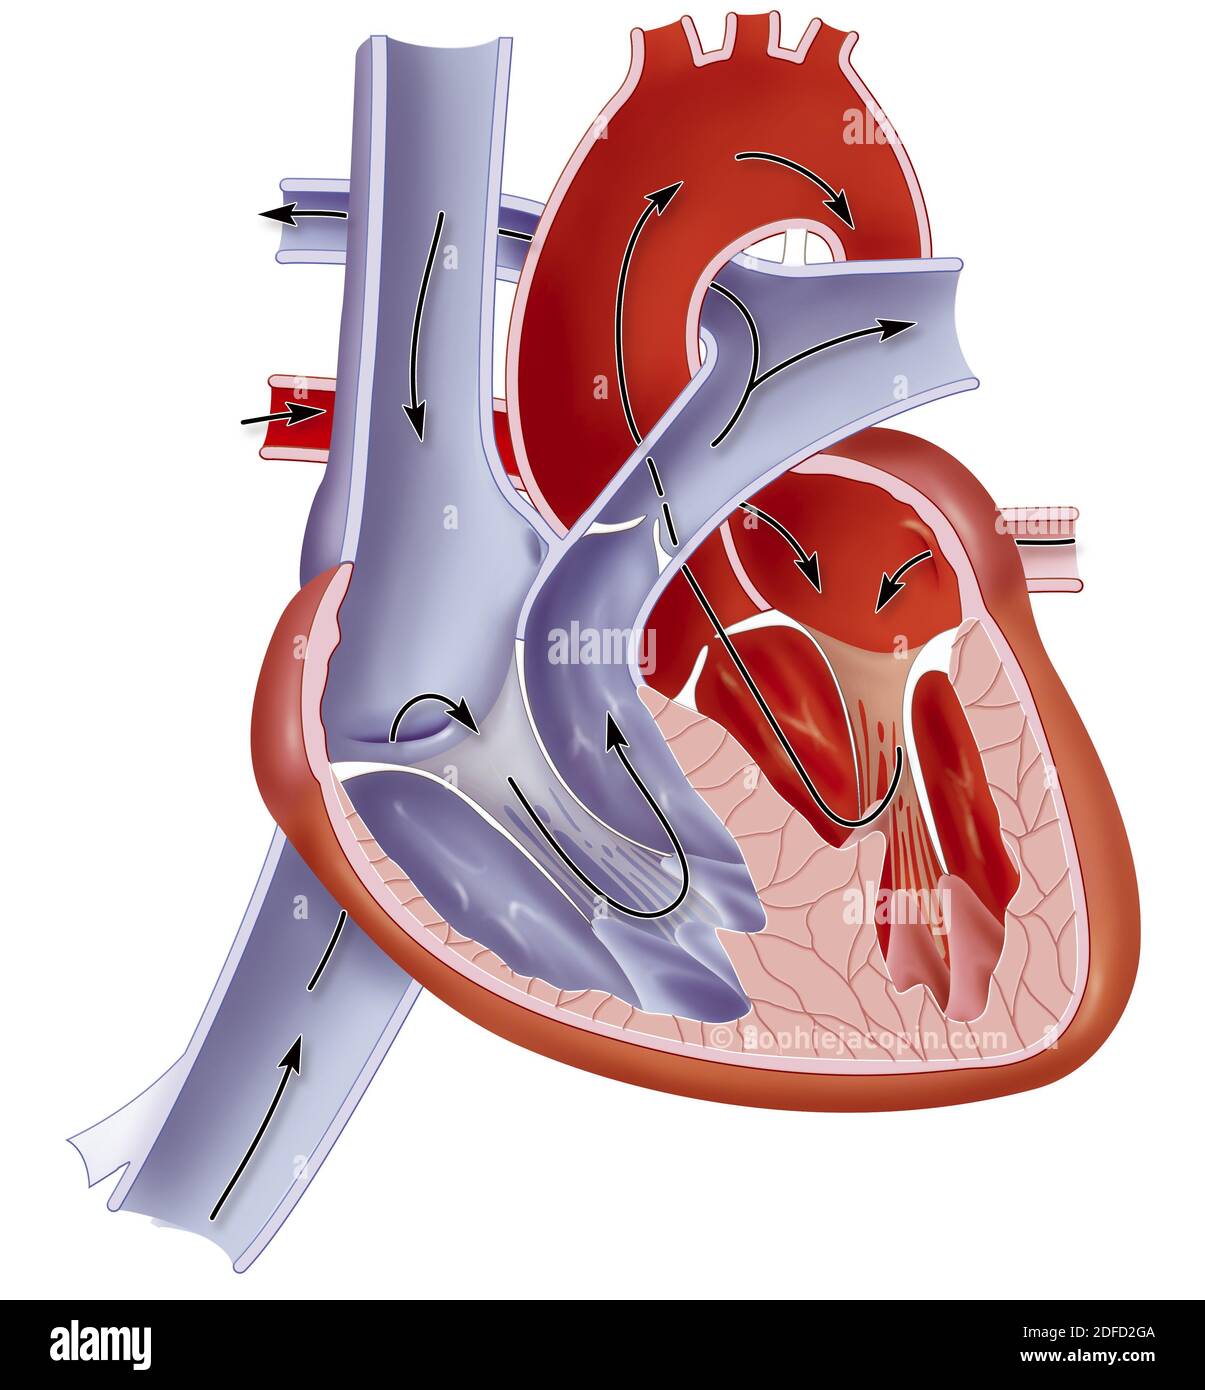 Heart of an infant. Stock Photo